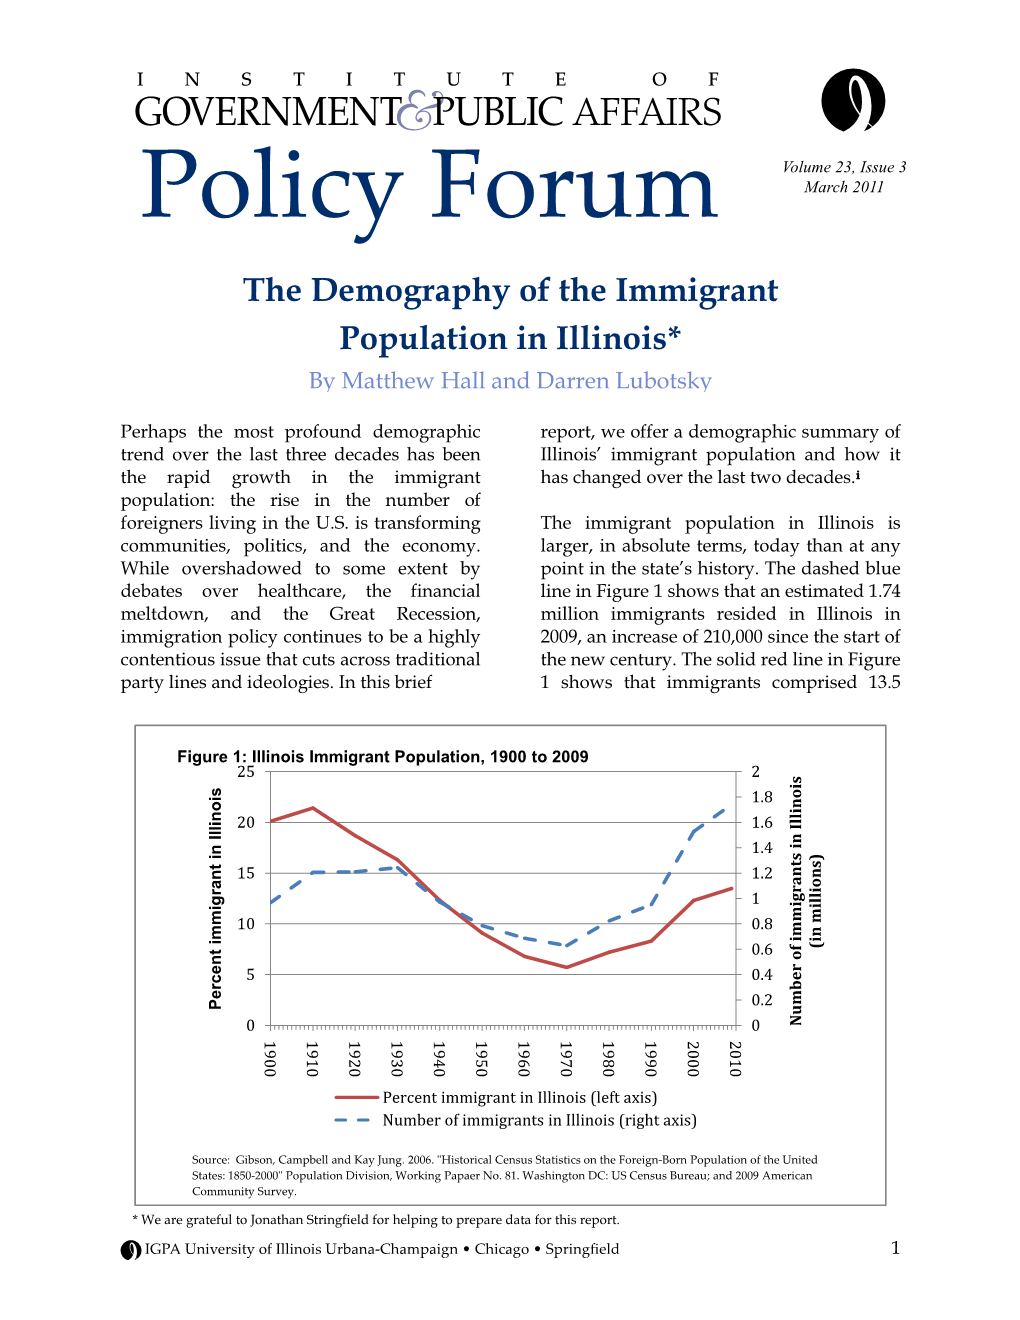 The Demography of the Immigrant Population in Illinois* by Matthew Hall and Darren Lubotsky